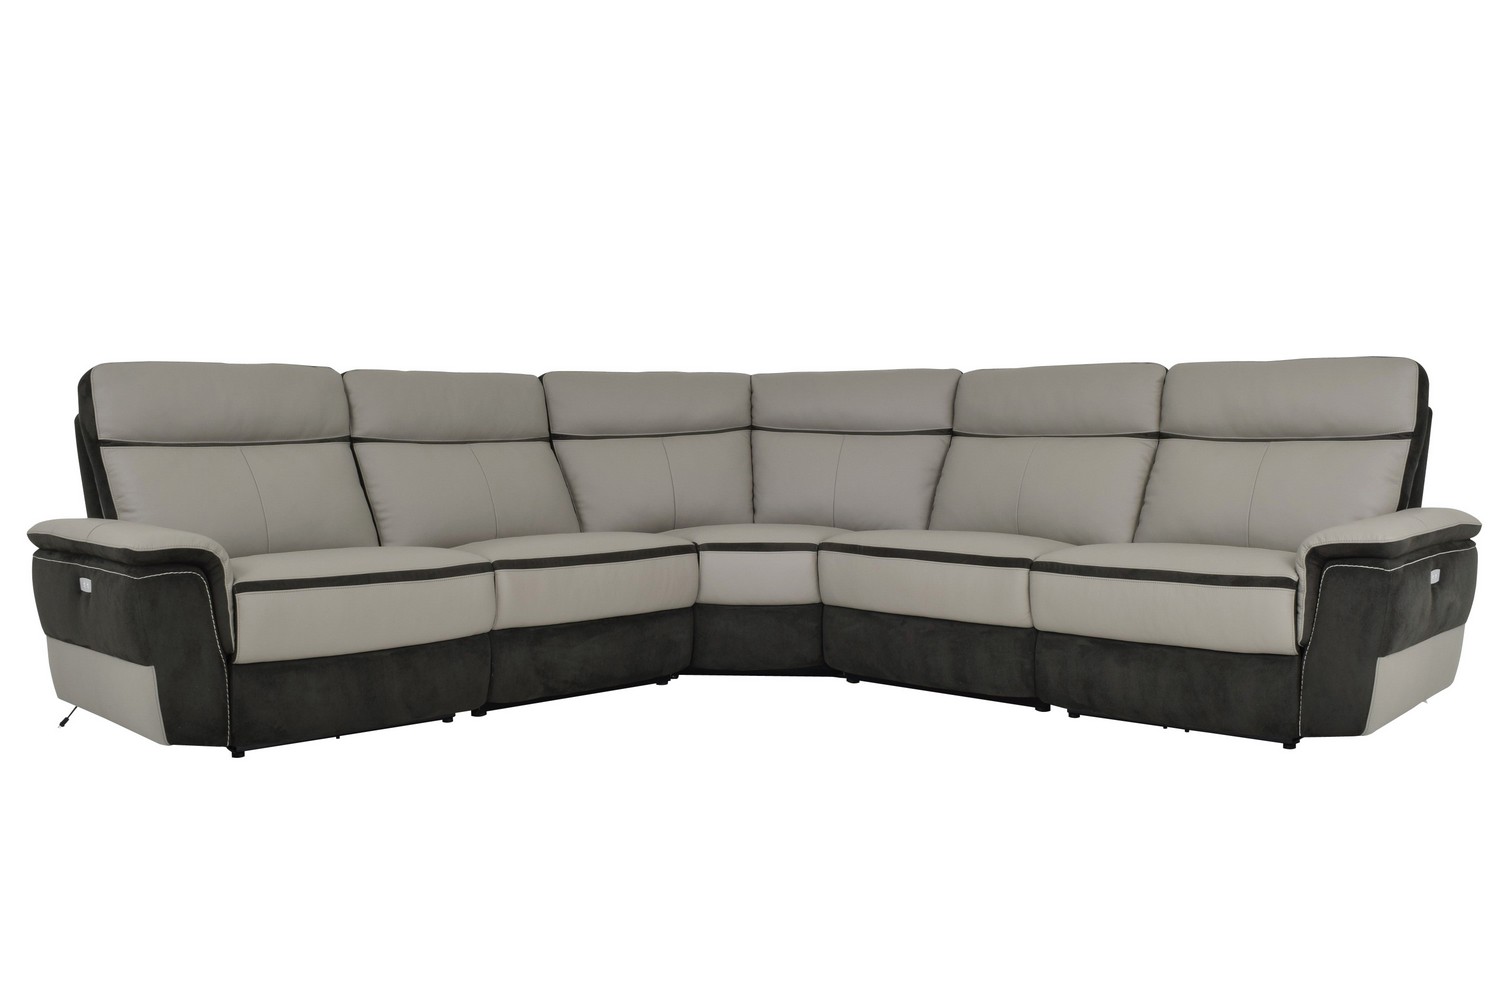 Homelegance Laertes Power Reclining Sectional Sofa Set - Top Grain Leather/Fabric - Taupe Grey